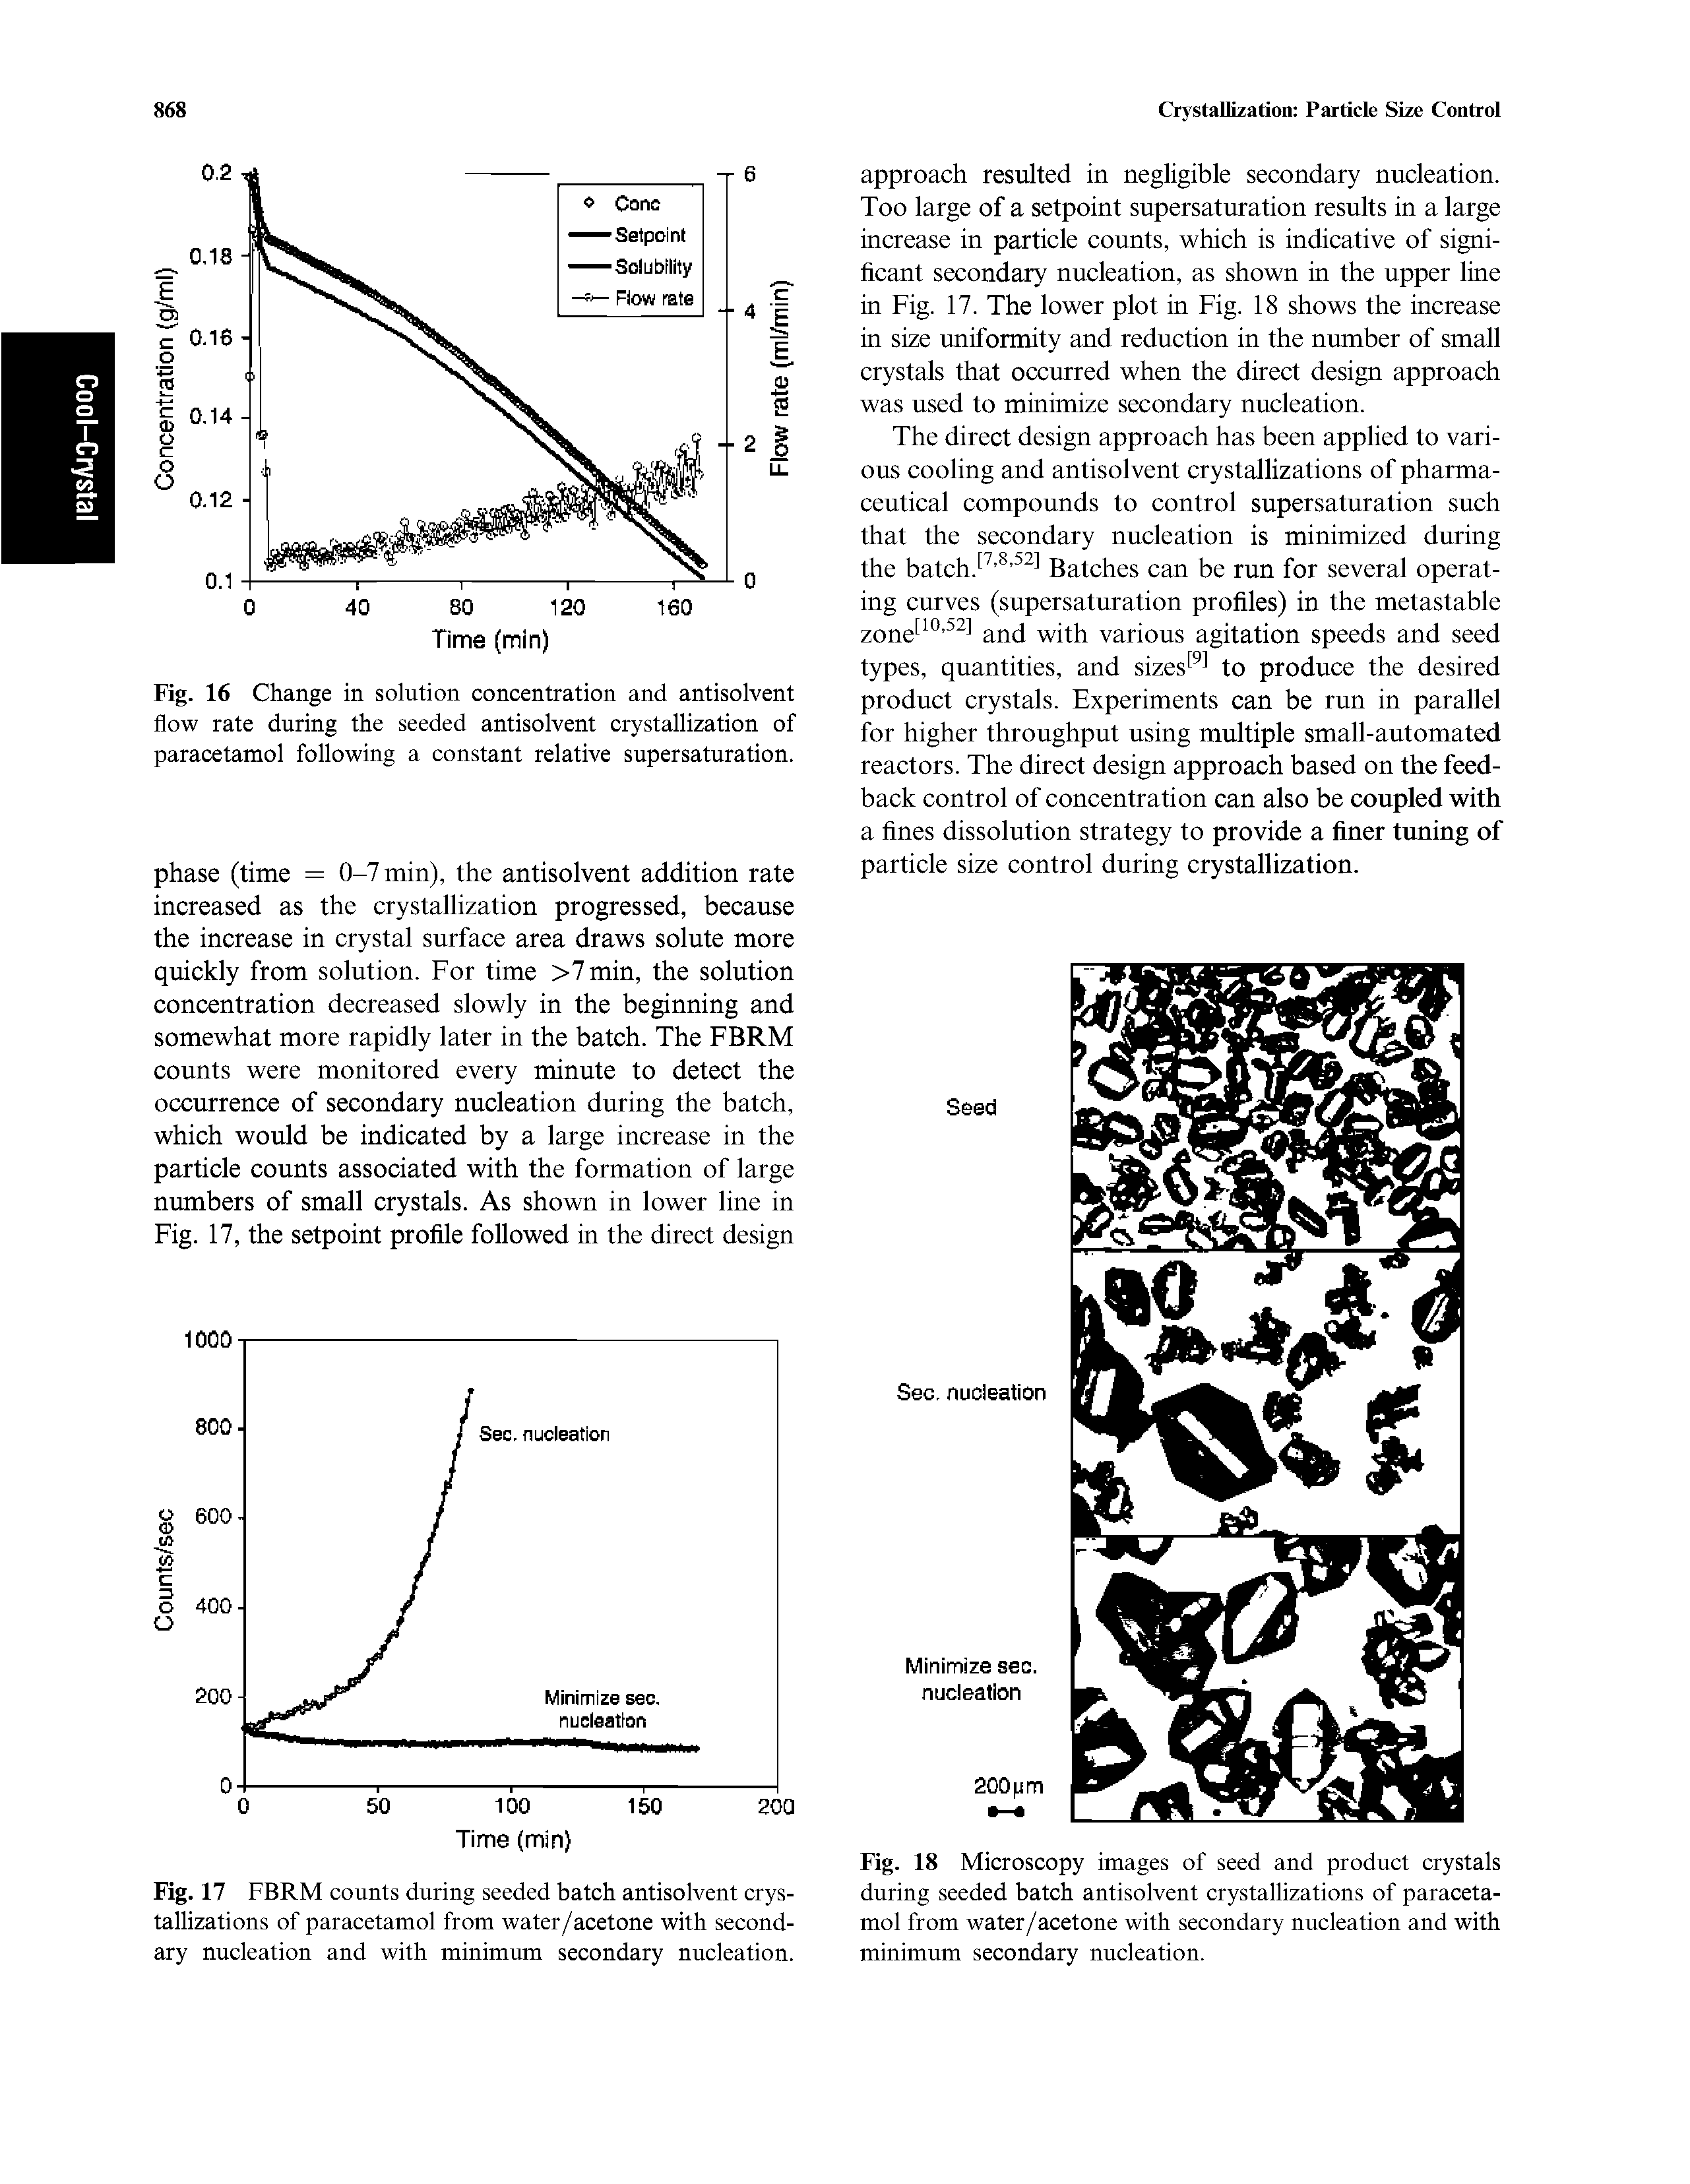 Fig. 17 FBRM counts during seeded batch antisolvent crystallizations of paracetamol from water/acetone with secondary nucleation and with minimum secondary nucleation.